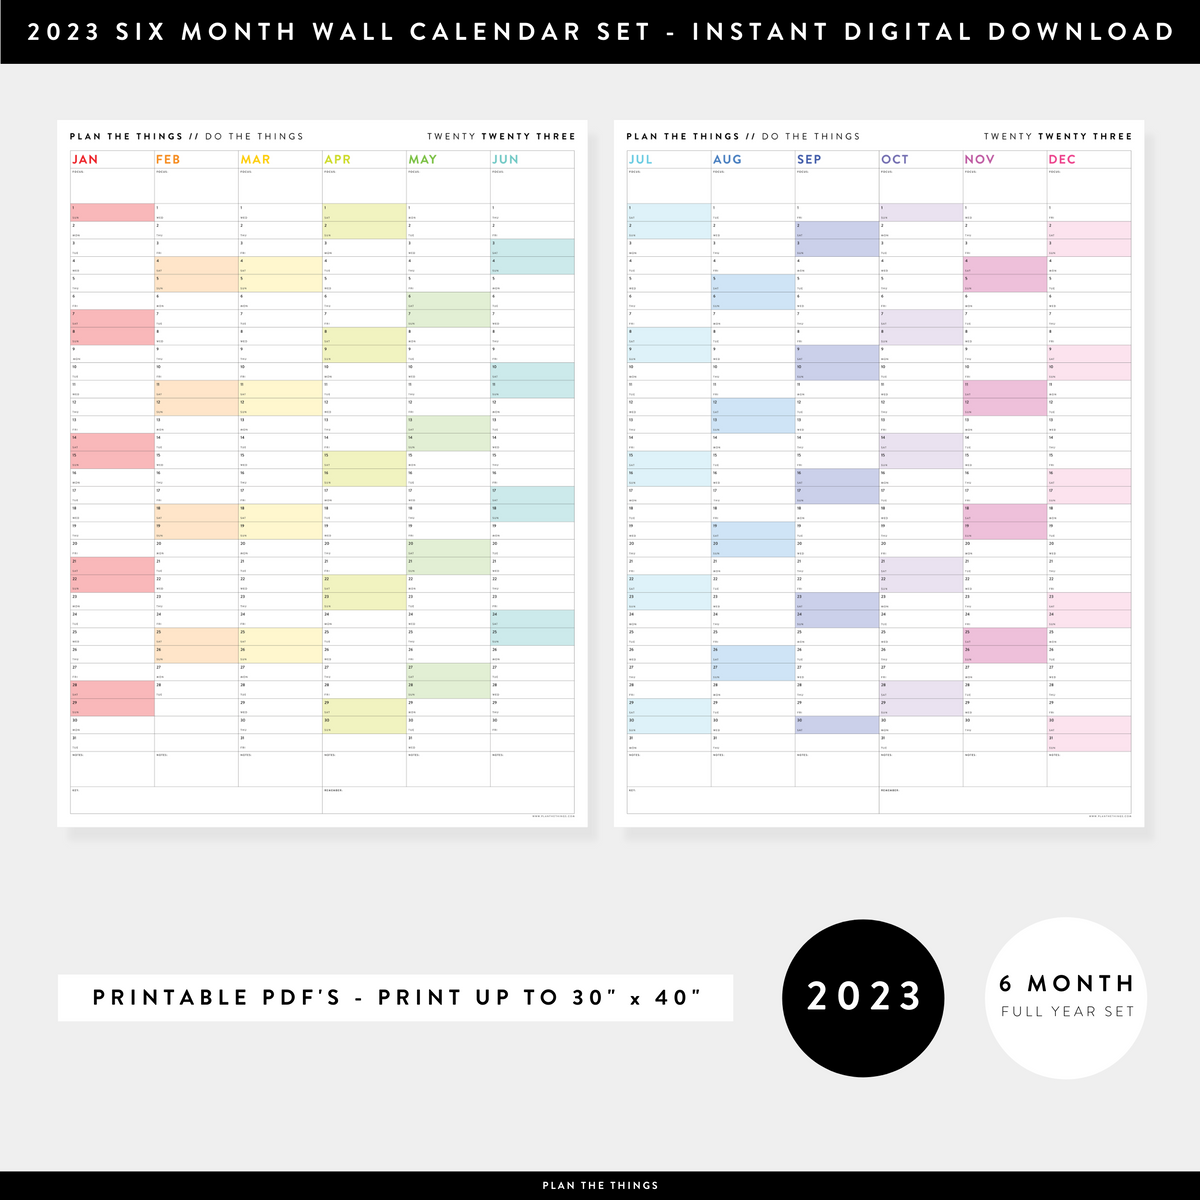 PRINTABLE 2023 SIX MONTH CALENDAR SET FULL YEAR // INSTANT DOWNLOAD